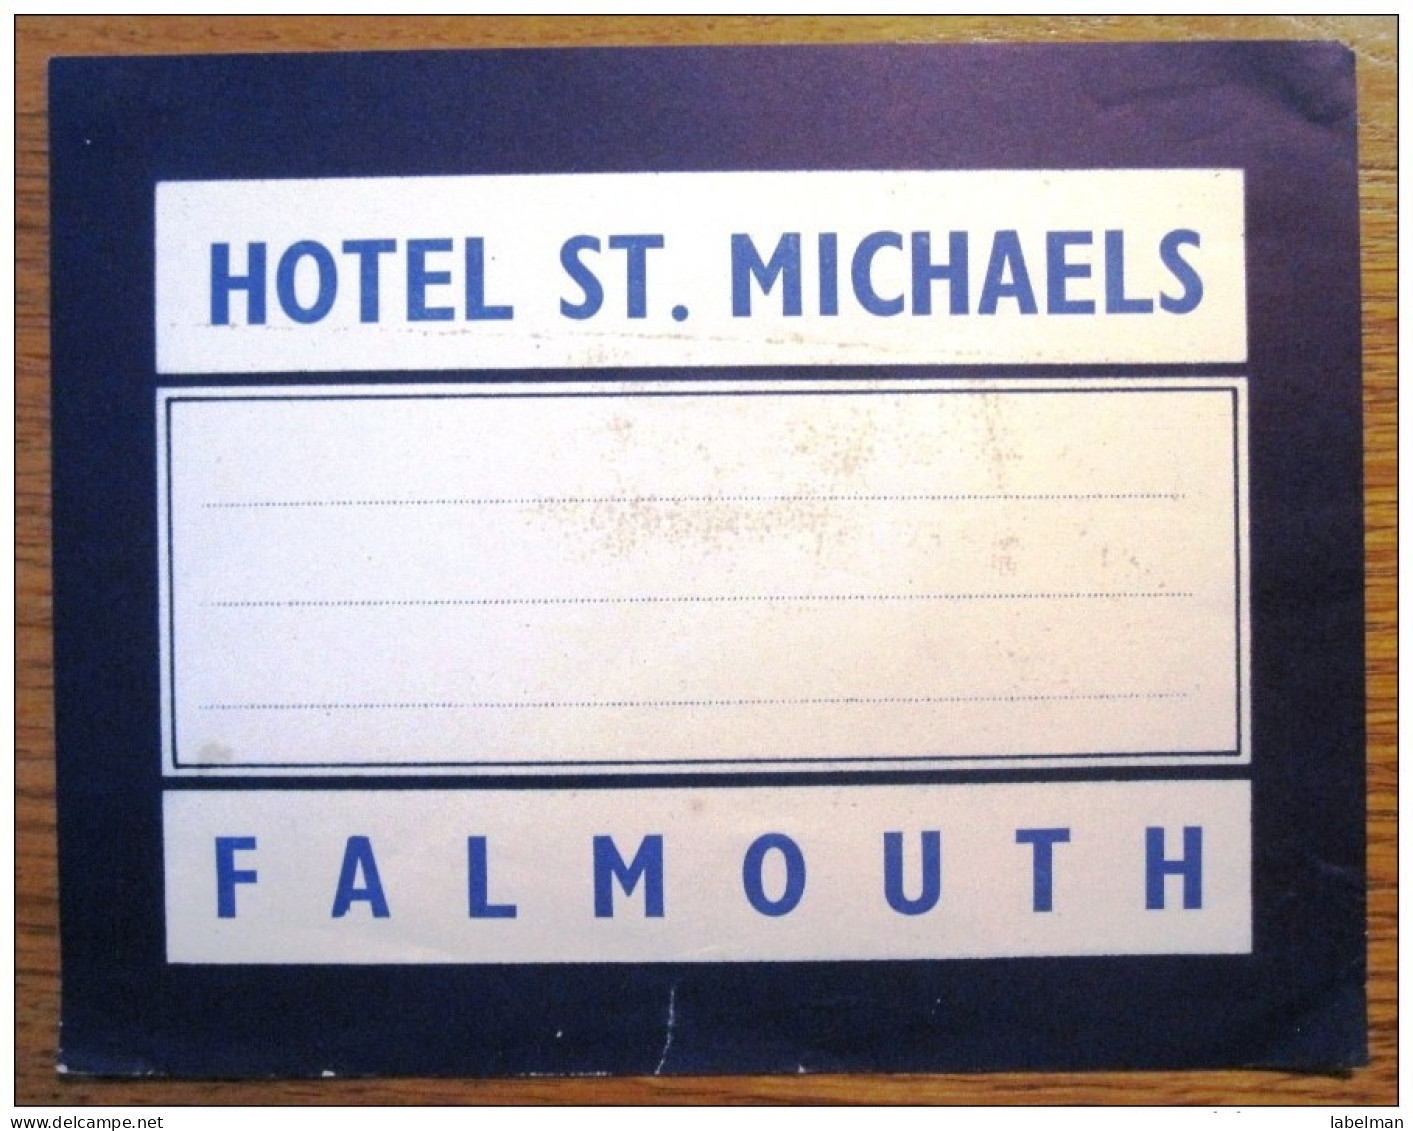 HOTEL MOTOR MICHAELS FALMOUTH LONDON UK ENGLAND GREAT BRITAIN STICKER DECAL LUGGAGE LABEL ETIQUETTE AUFKLEBER - Hotel Labels